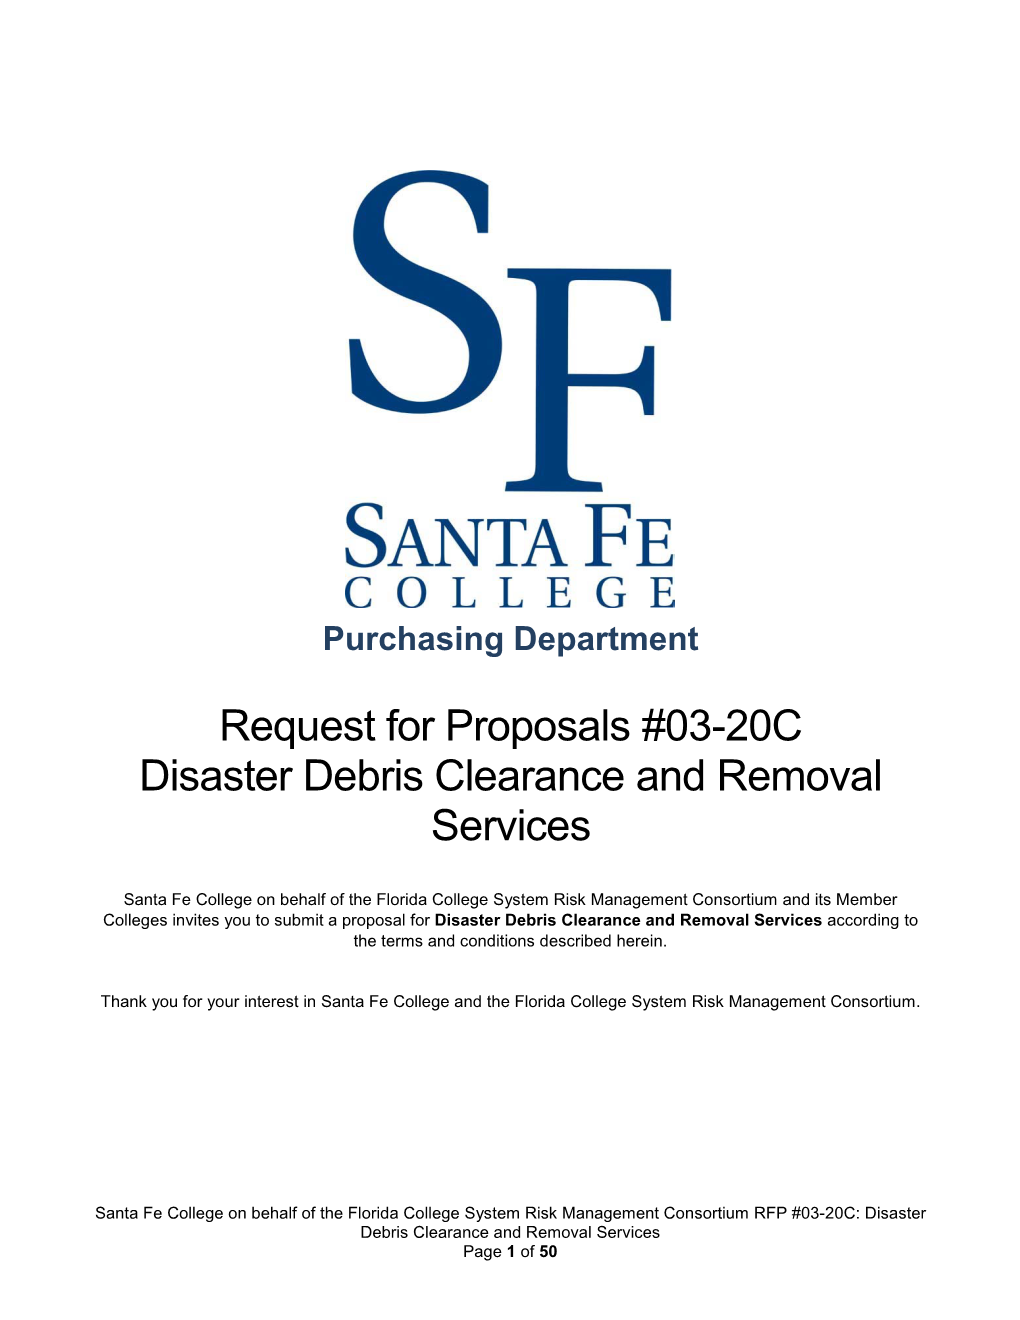 Request for Proposals #03-20C Disaster Debris Clearance and Removal Services